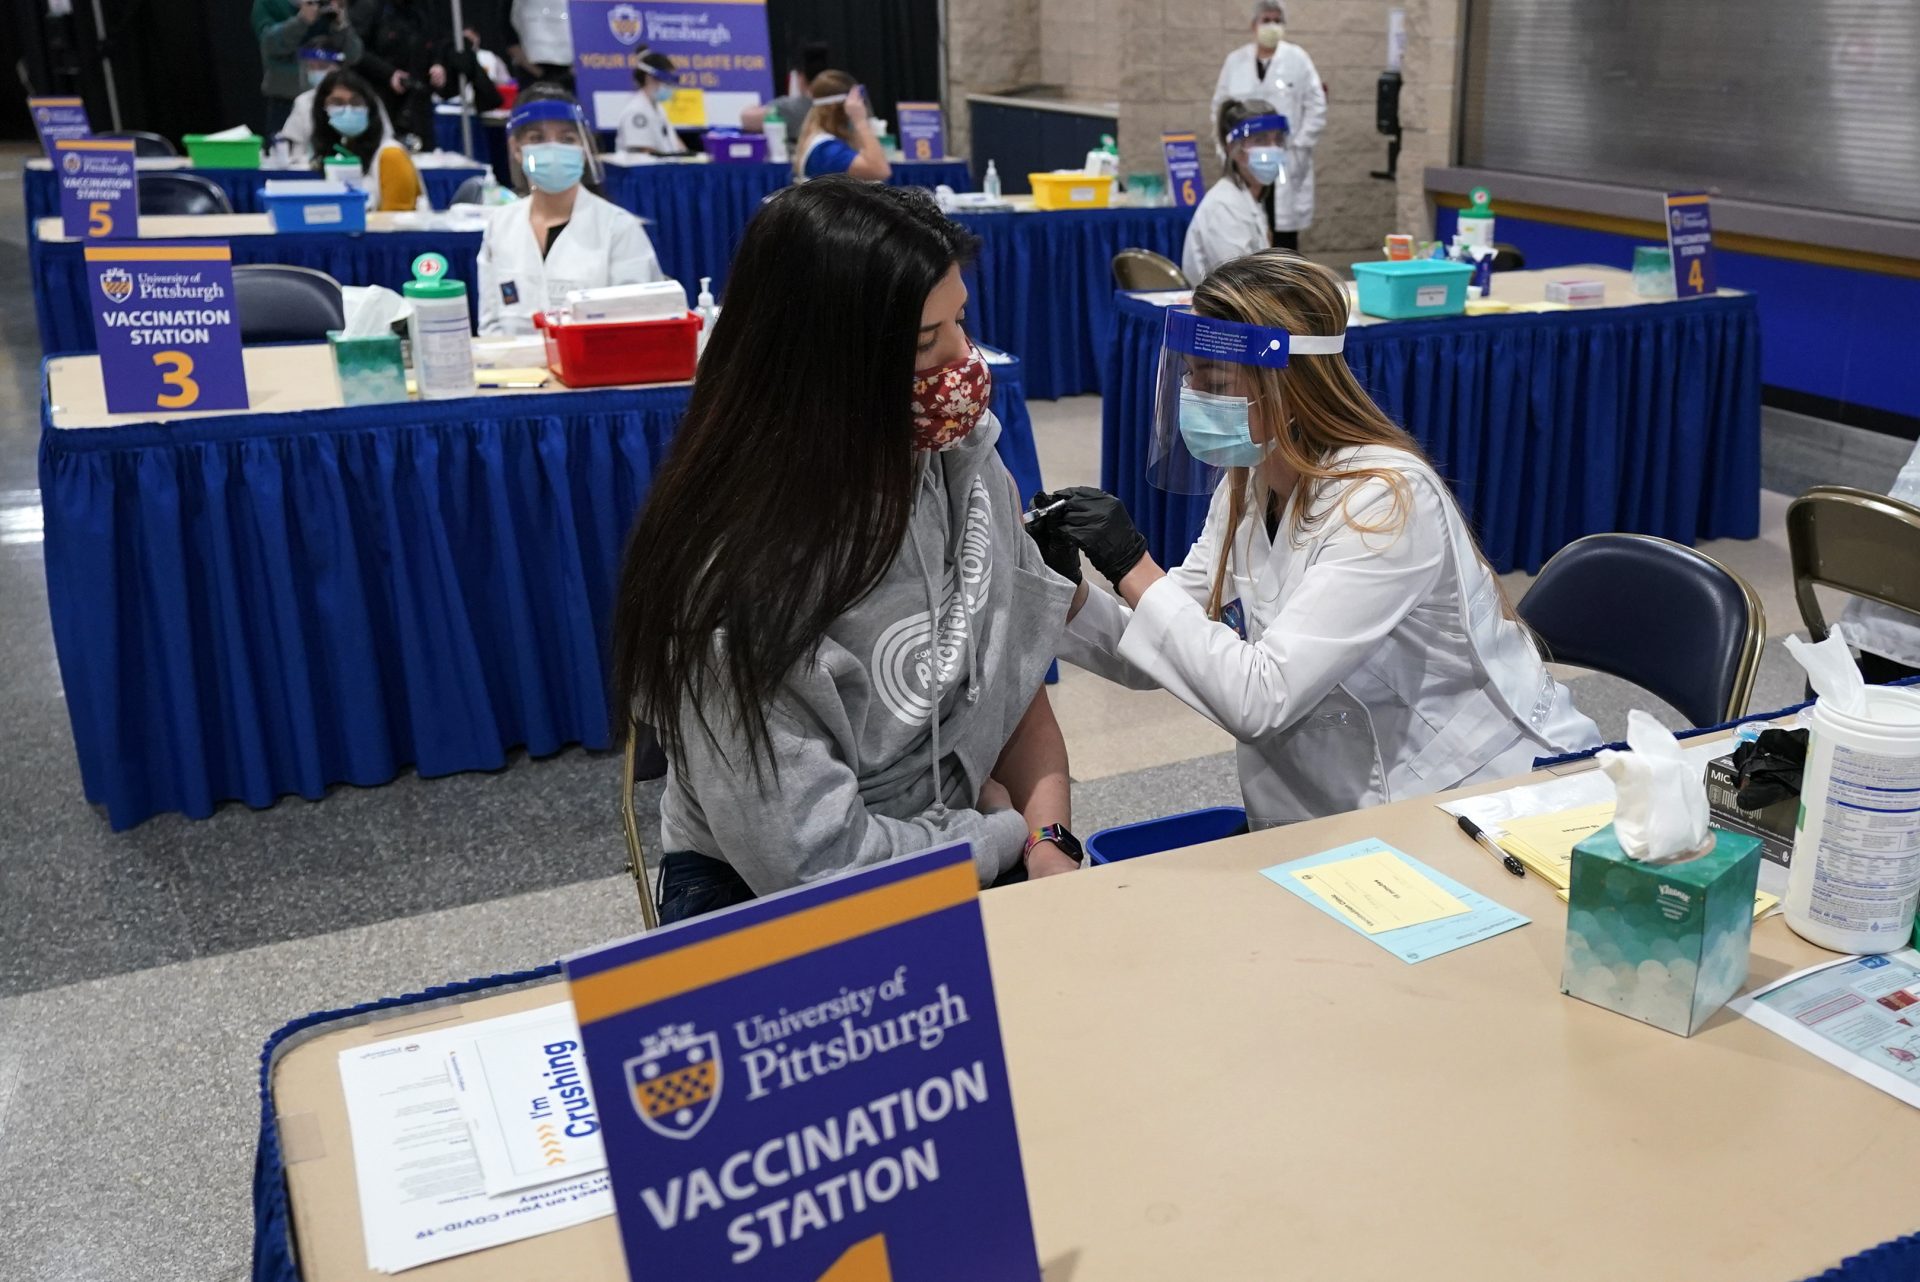 Tiffany Husak, left, a nursing student at the Community College of Allegheny County, receives her first dose of the Moderna COVID-19 Vaccine, during a vaccination clinic hosted by the University of Pittsburgh and the Allegheny County Health Department at the Petersen Events Center, in Pittsburgh, Thursday, Jan. 28, 2021.